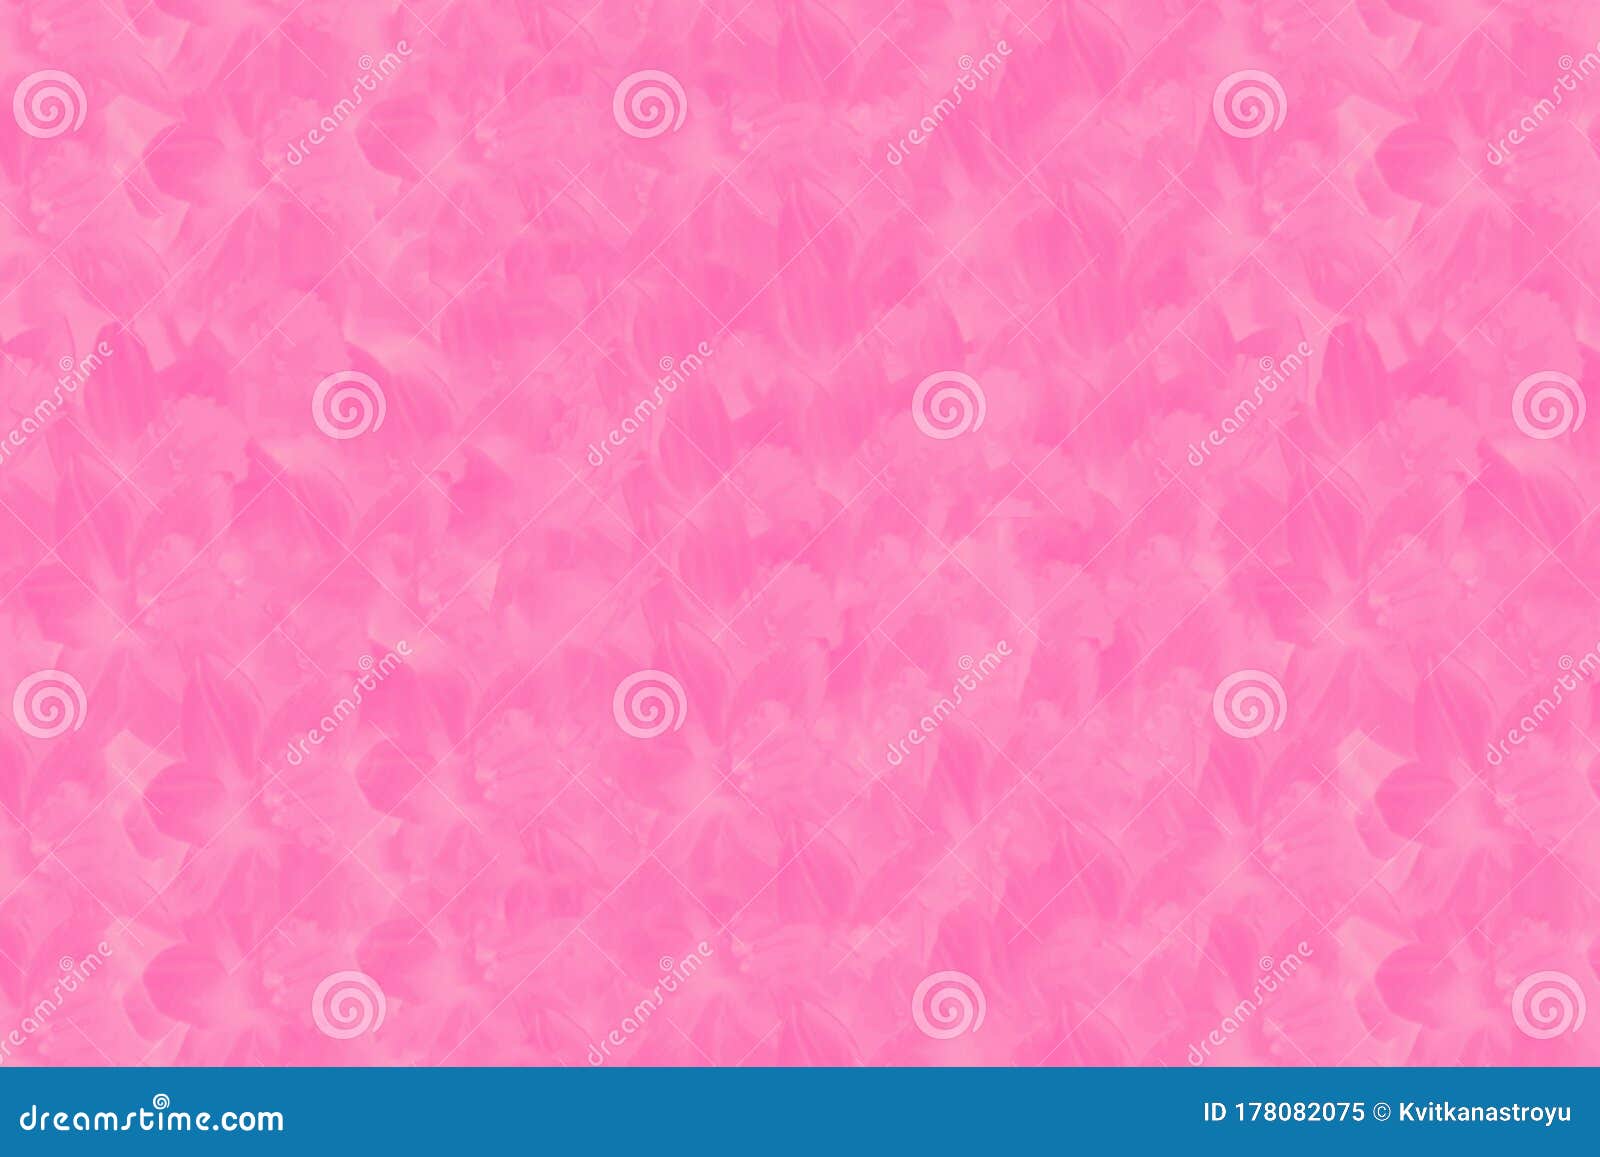 Seamless Flowers Background. Pink Floral Abstract Spring Flowers ...